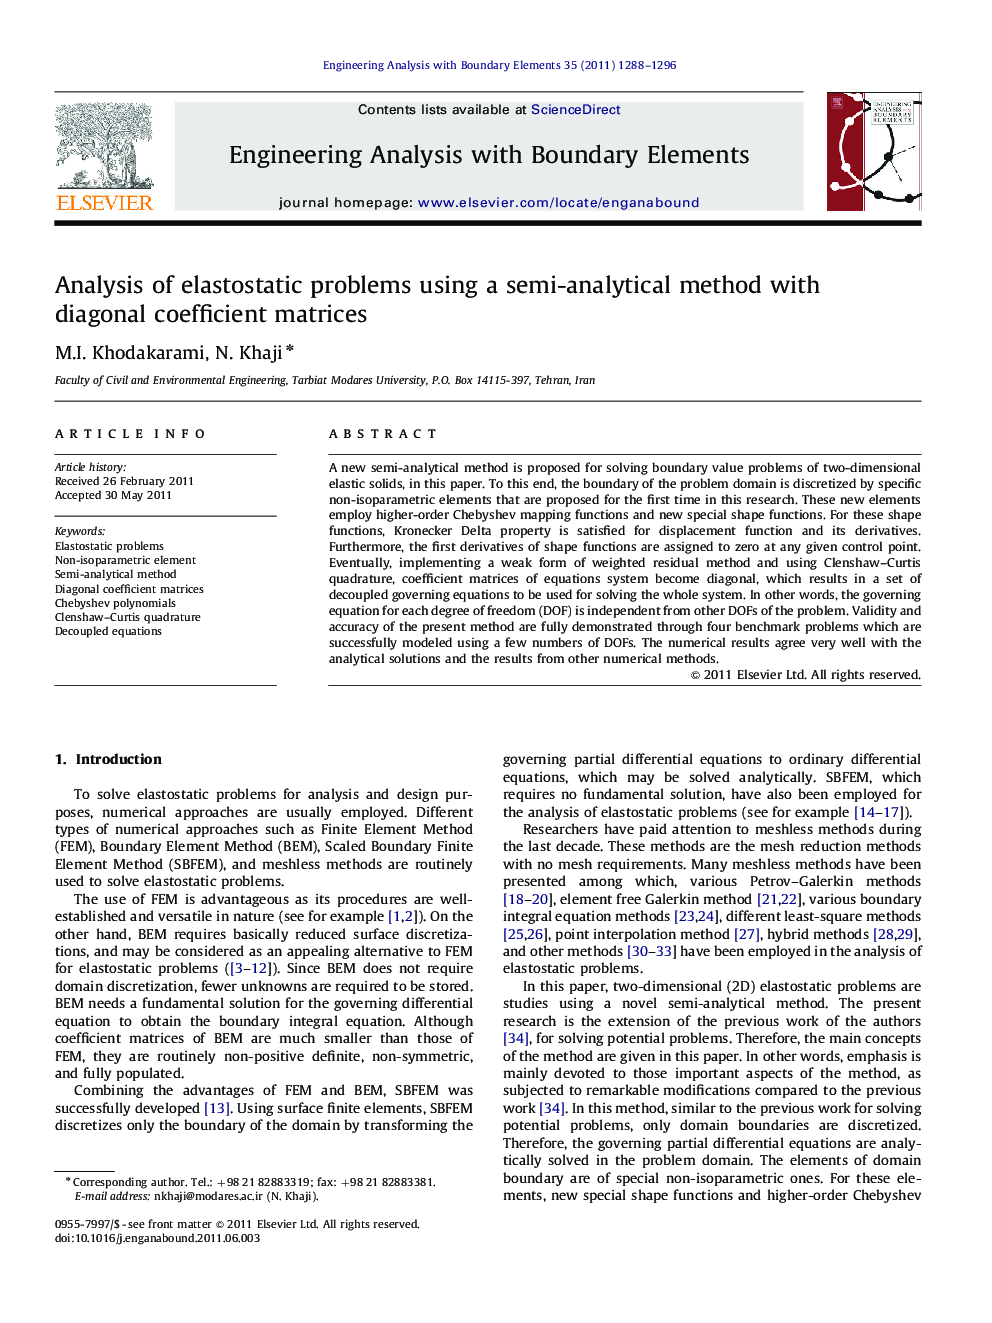 Analysis of elastostatic problems using a semi-analytical method with diagonal coefficient matrices